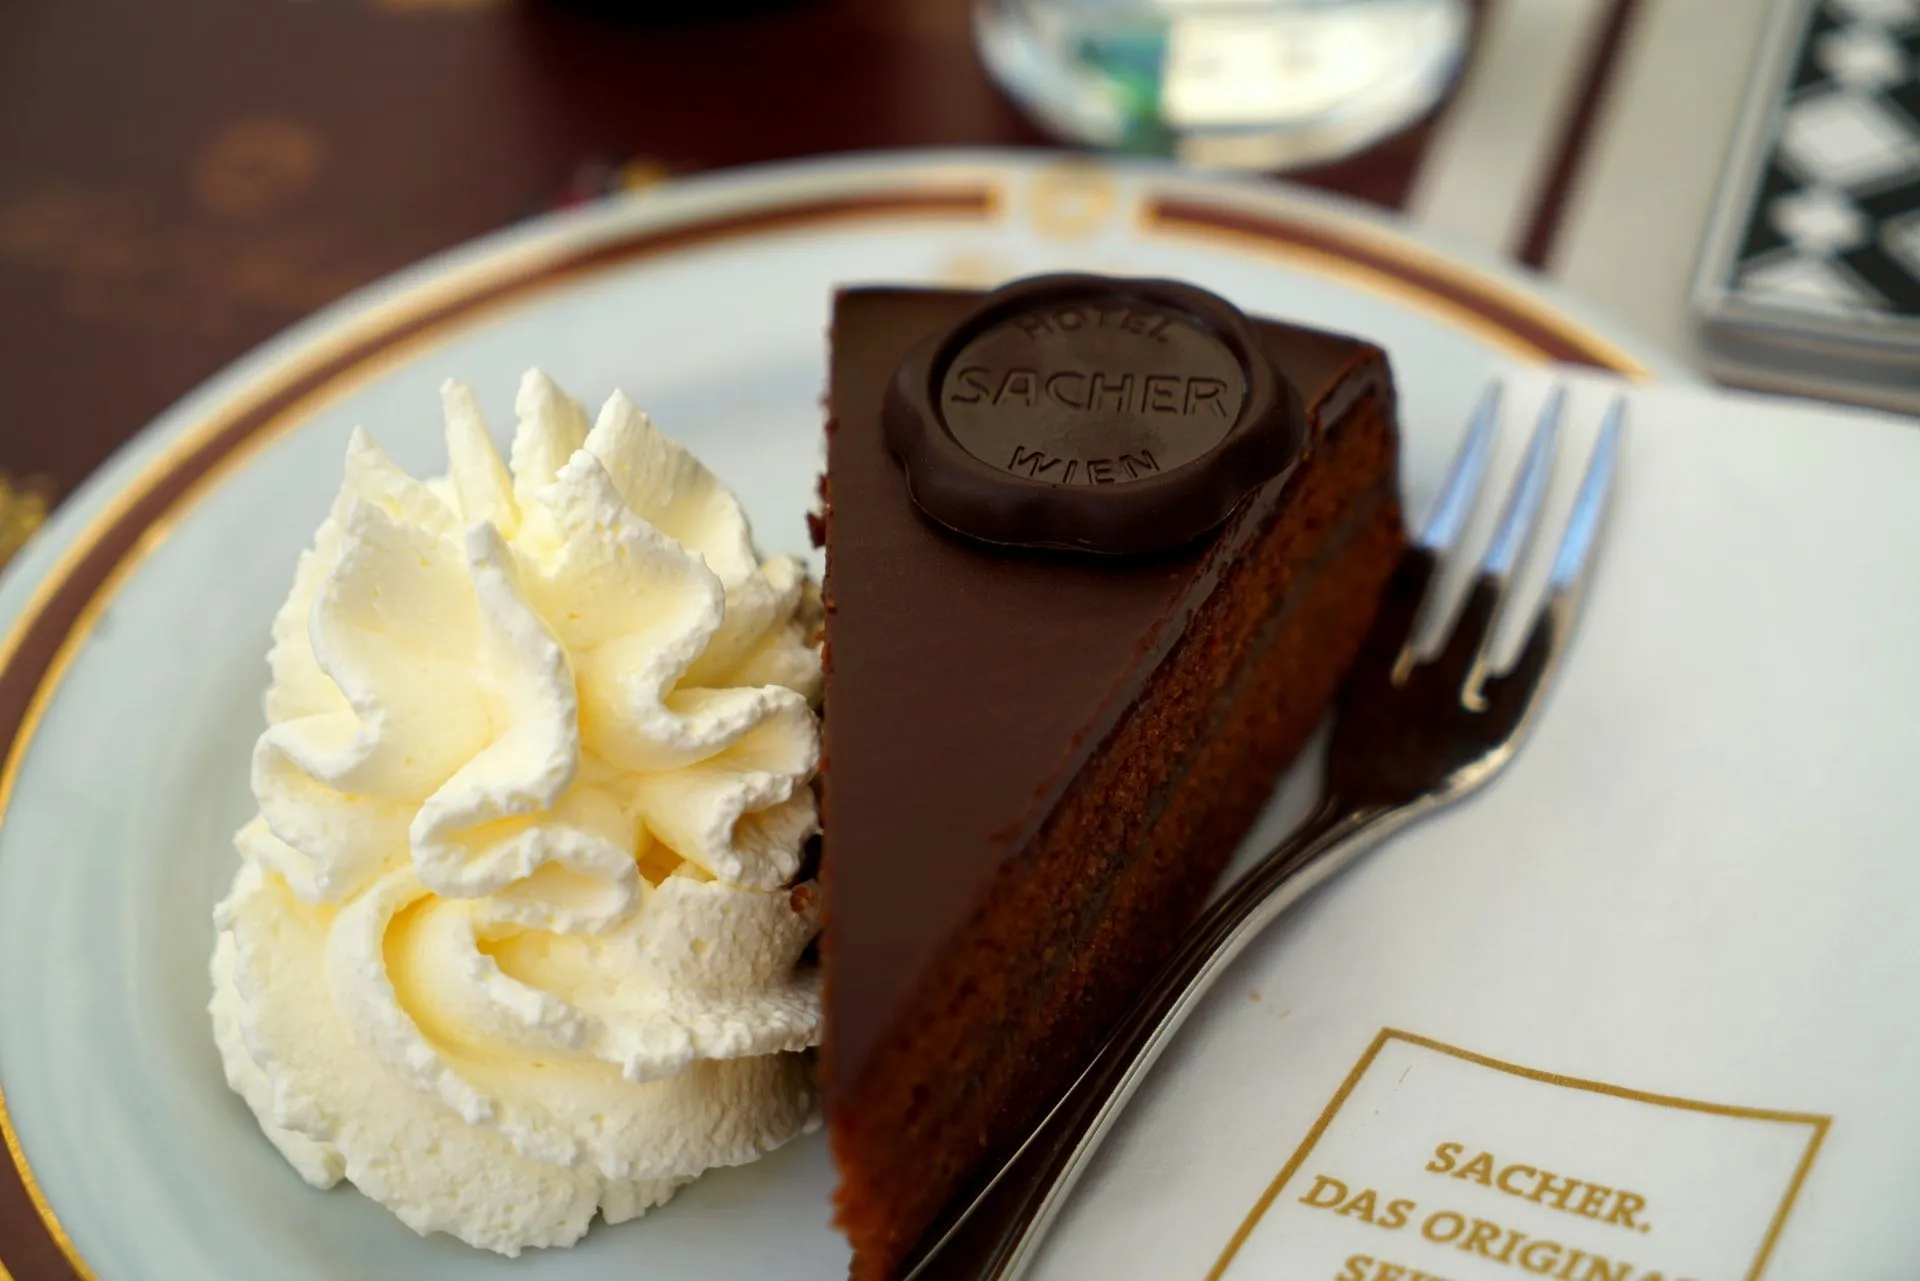 Facts on Sacher Torte are interesting.